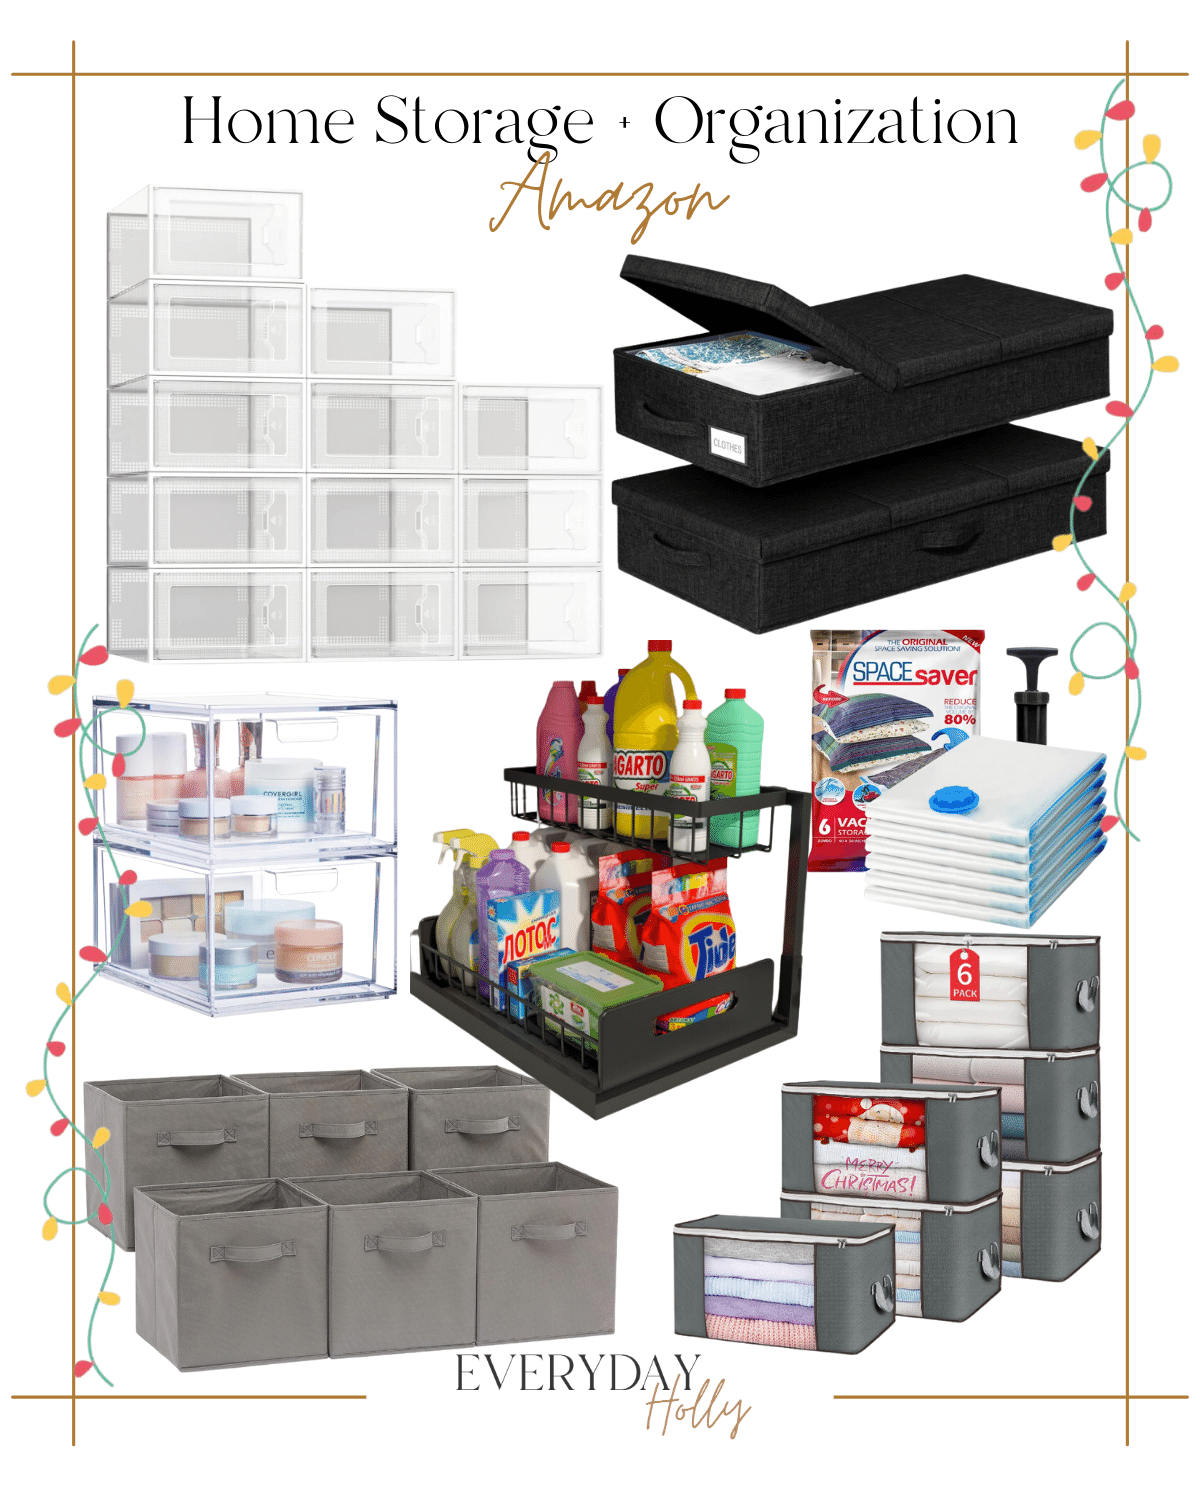 wrap up christmas quality storage and organization | #wrapup #christmas #storage #organization #holidays #homestorage #clothes #underthebed #underthesink #organizer